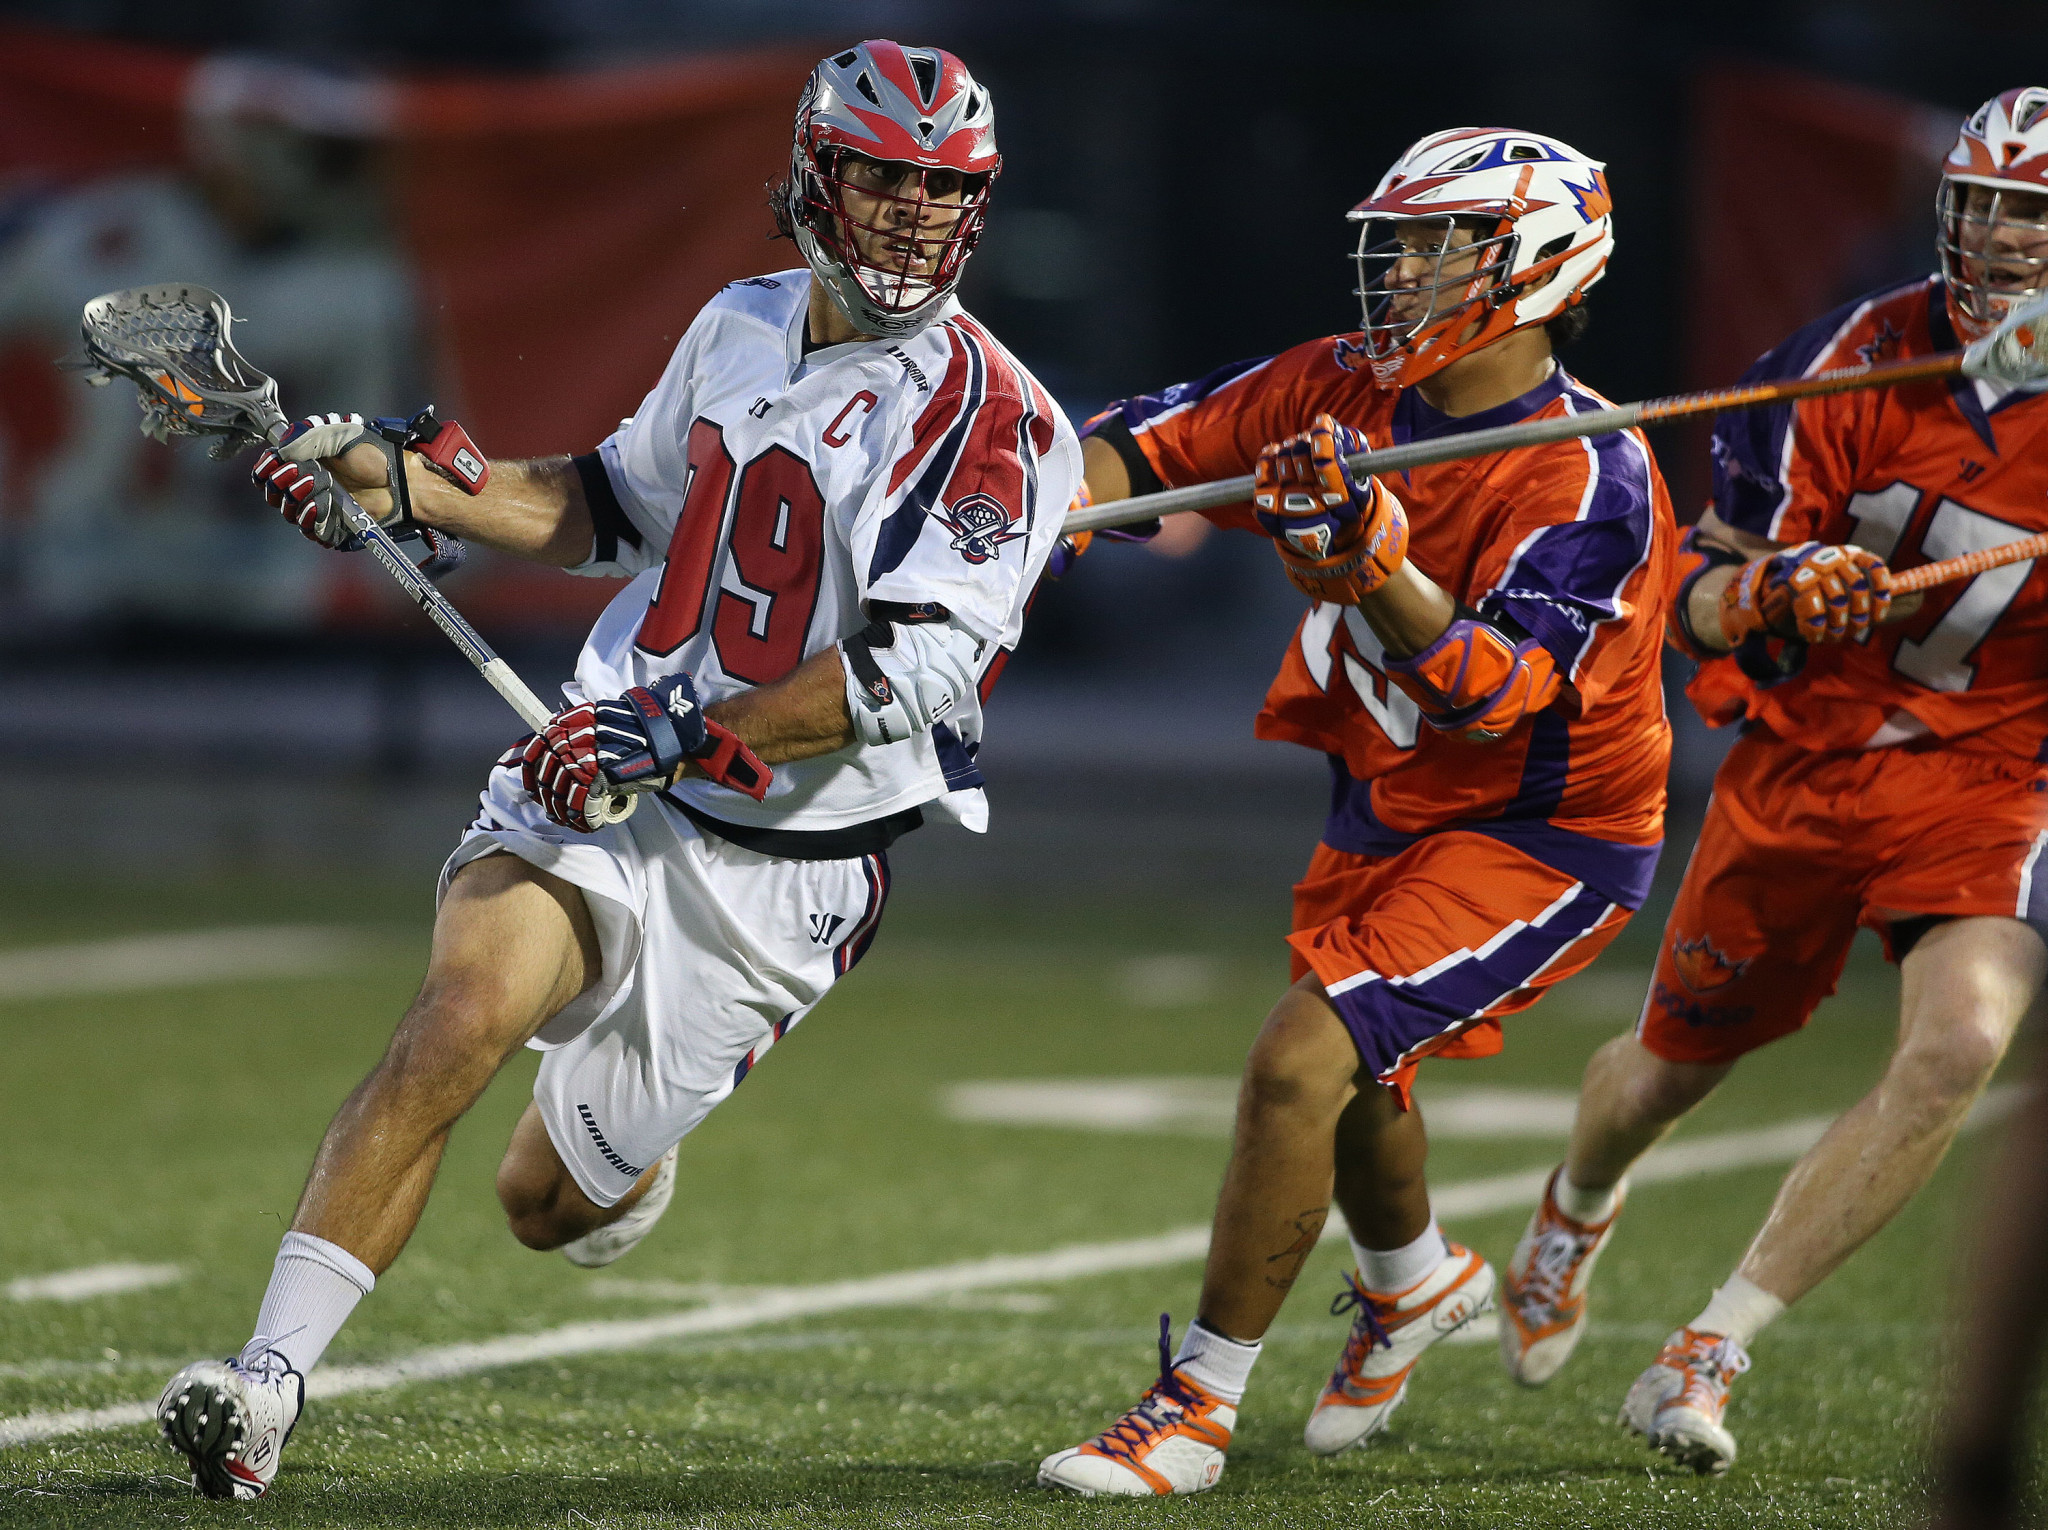 Holders Canada to play in Men's Lacrosse World Championships after